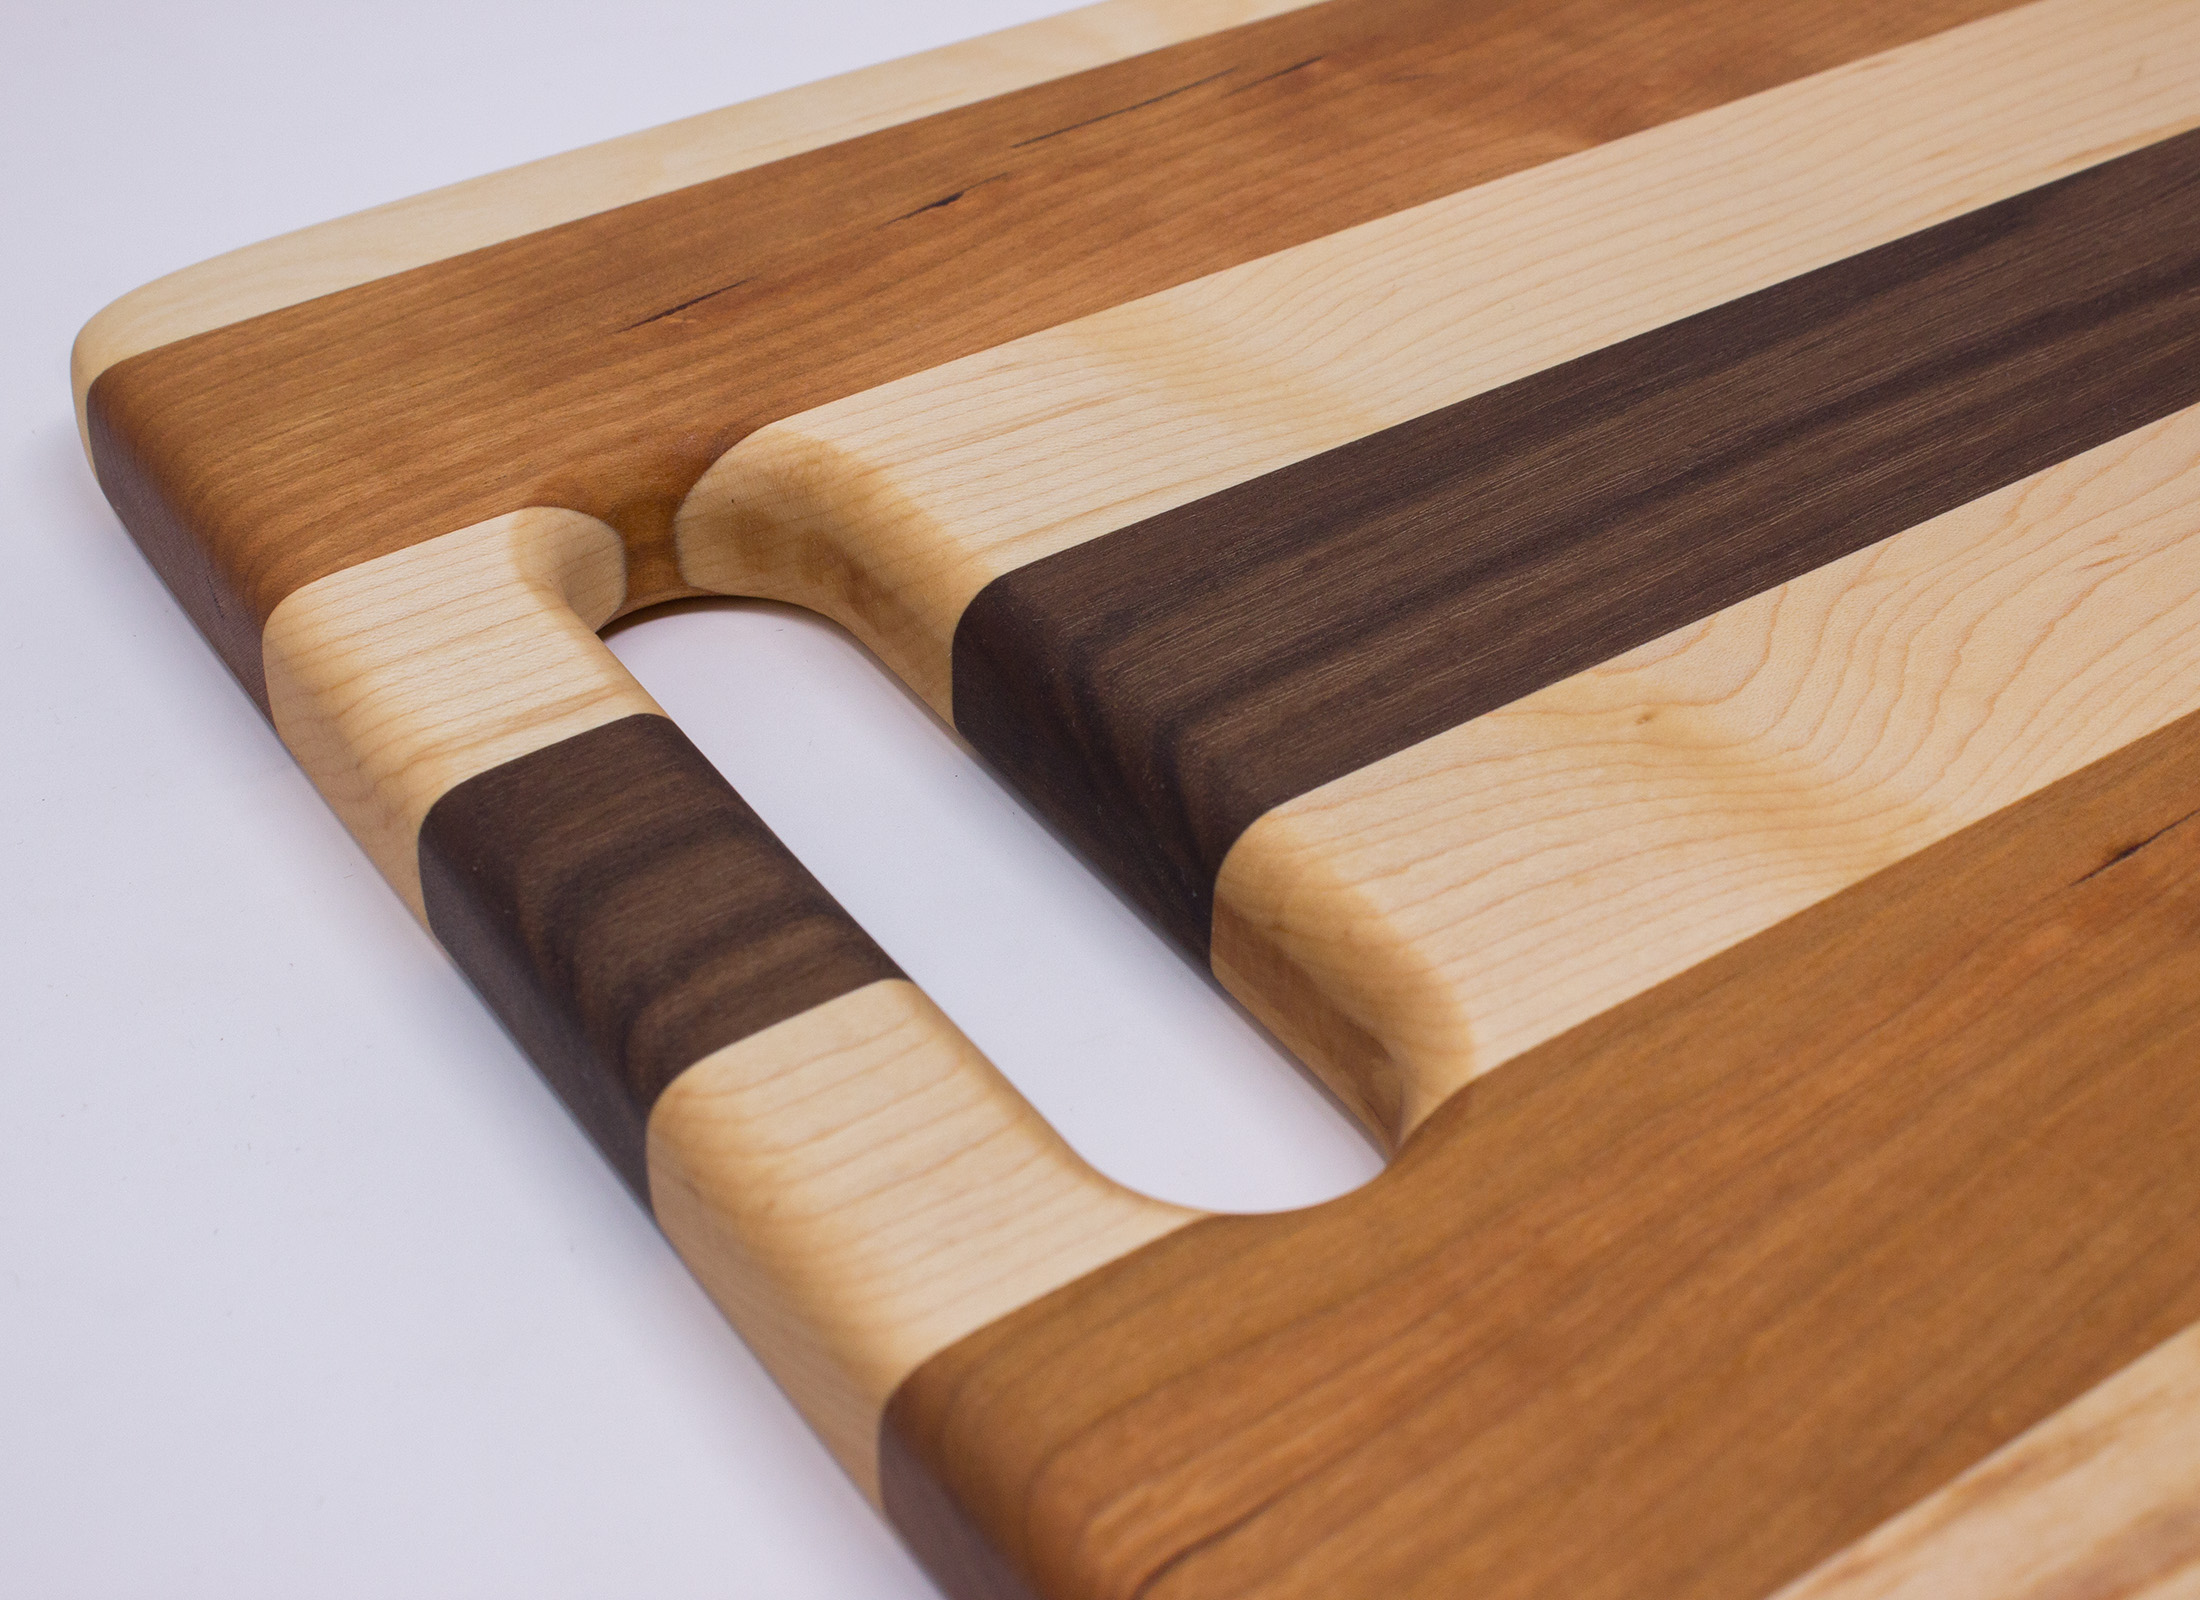 Maple, Cherry and Walnut with Handle Cutting Board – Rockford Woodcrafts